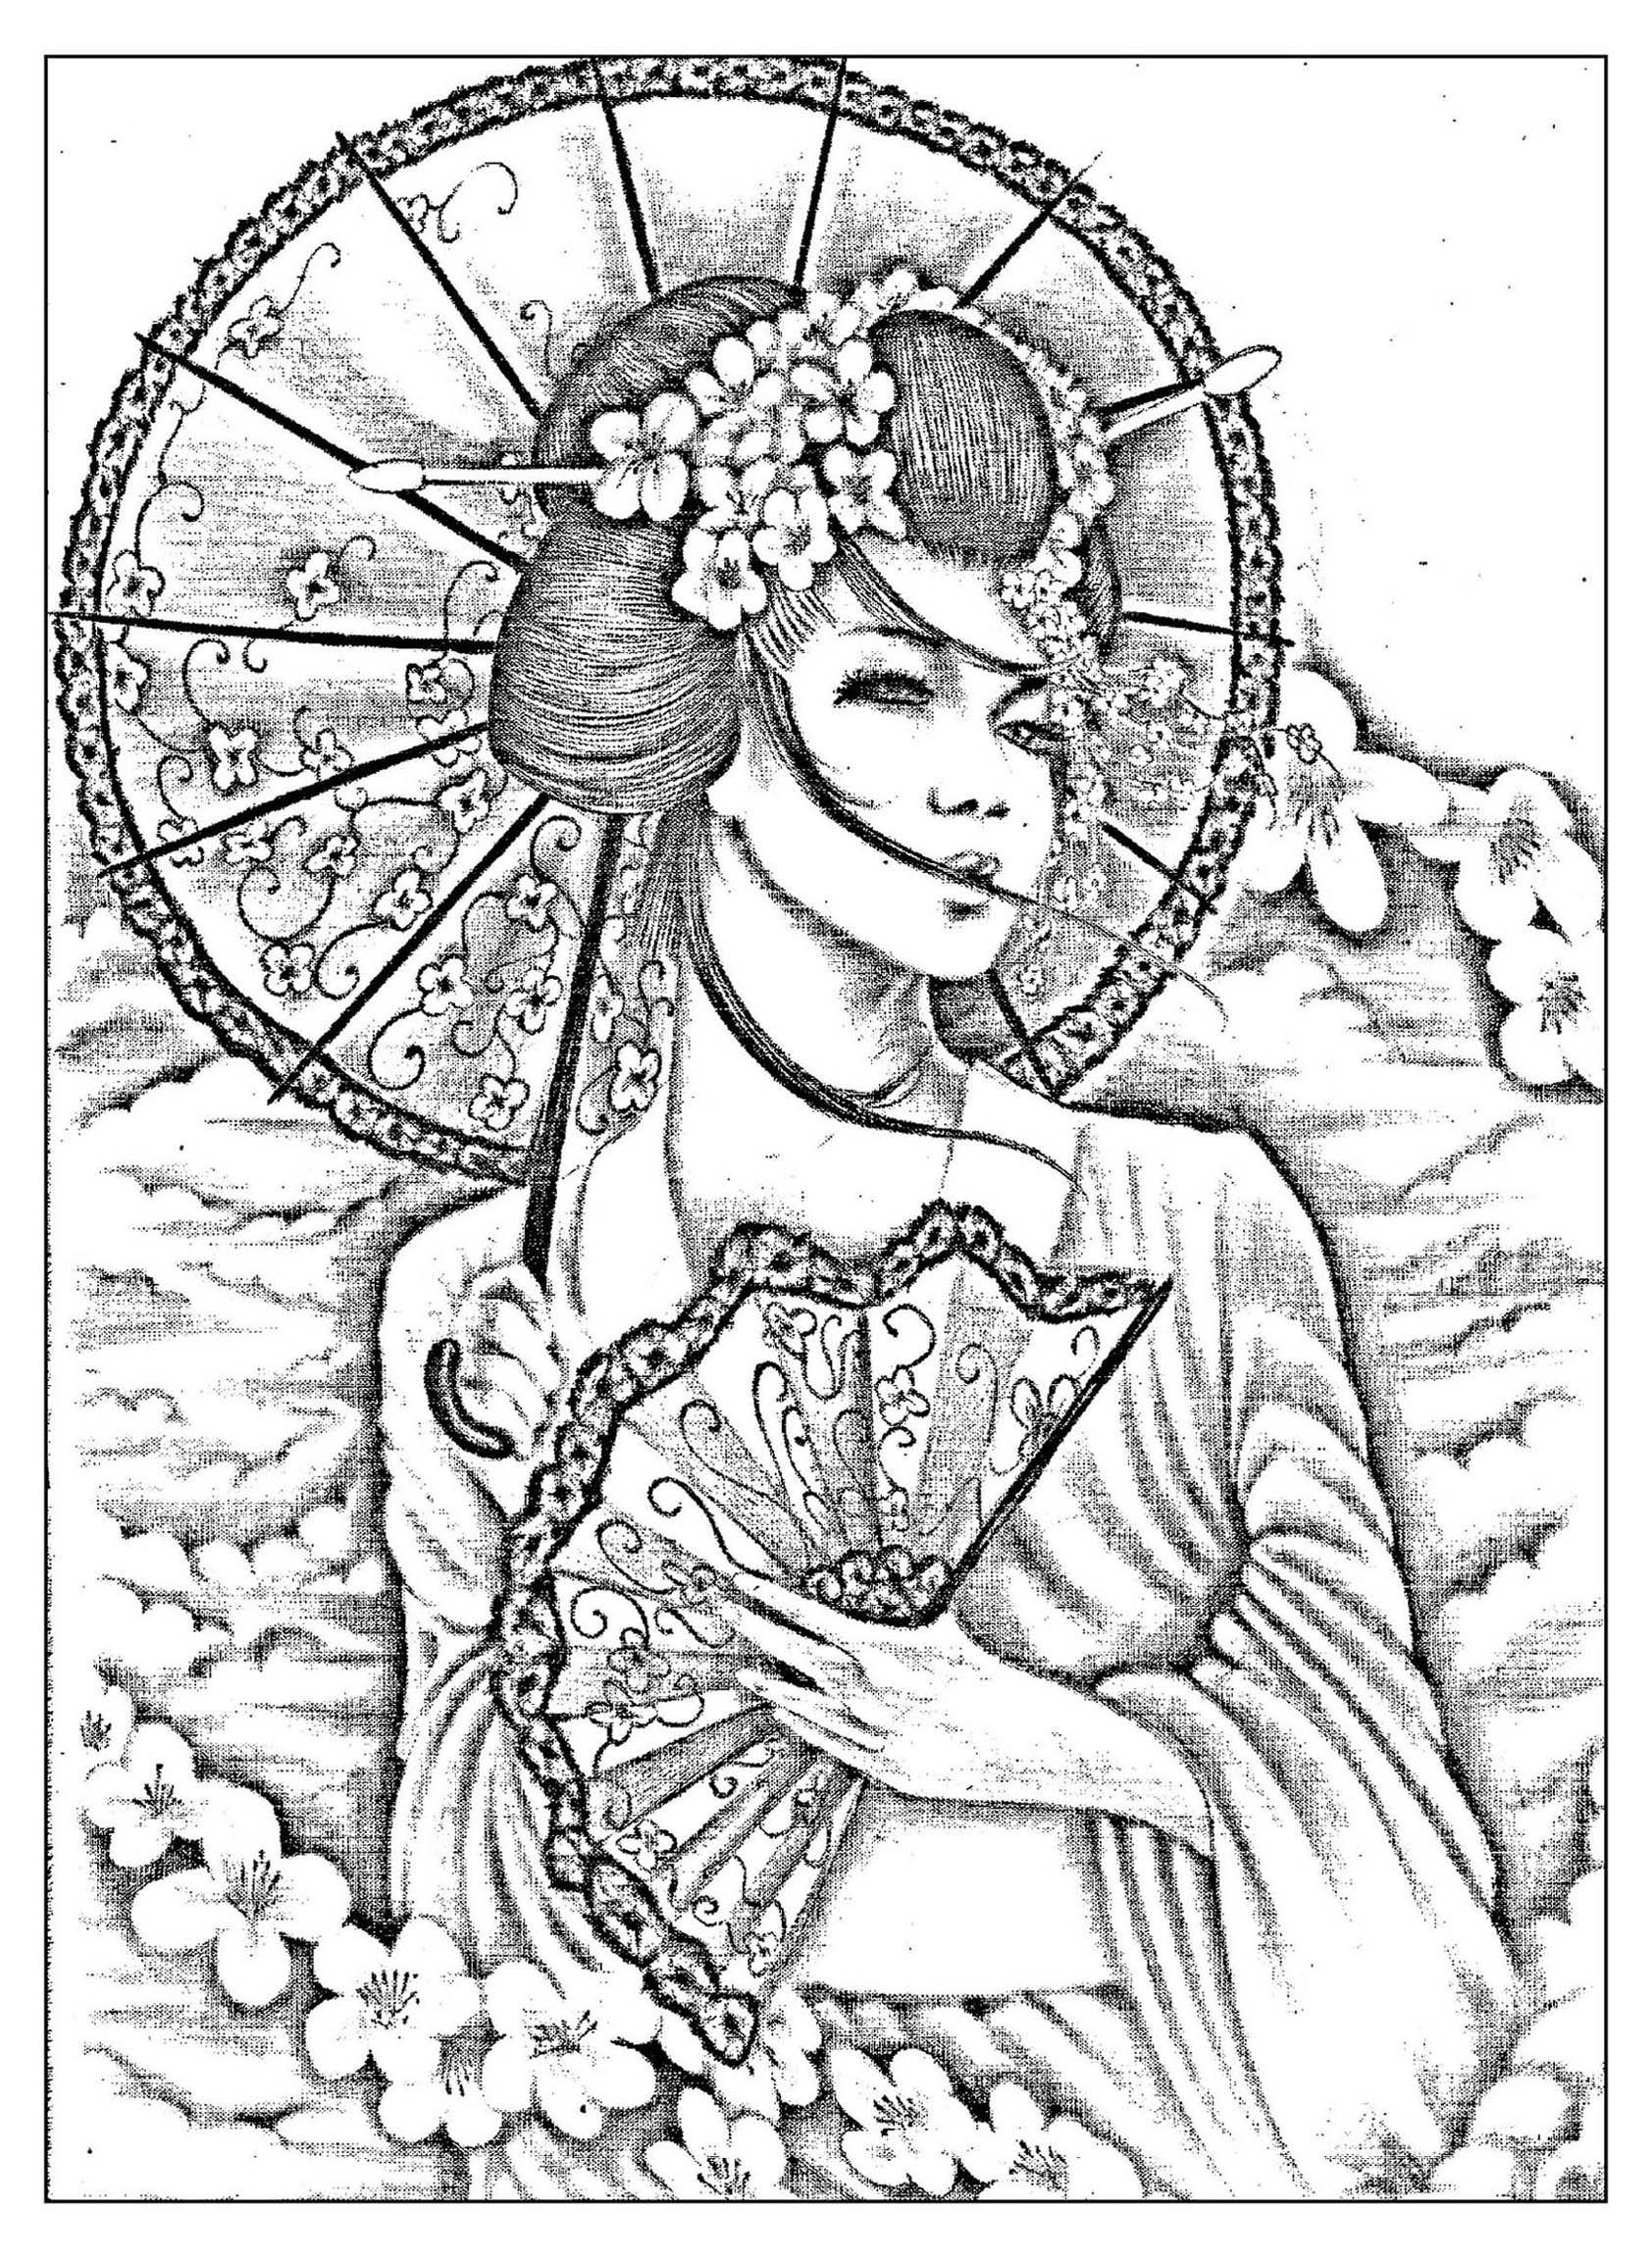 A beautiful Black & White drawing of a japanese with umbrella and évantail